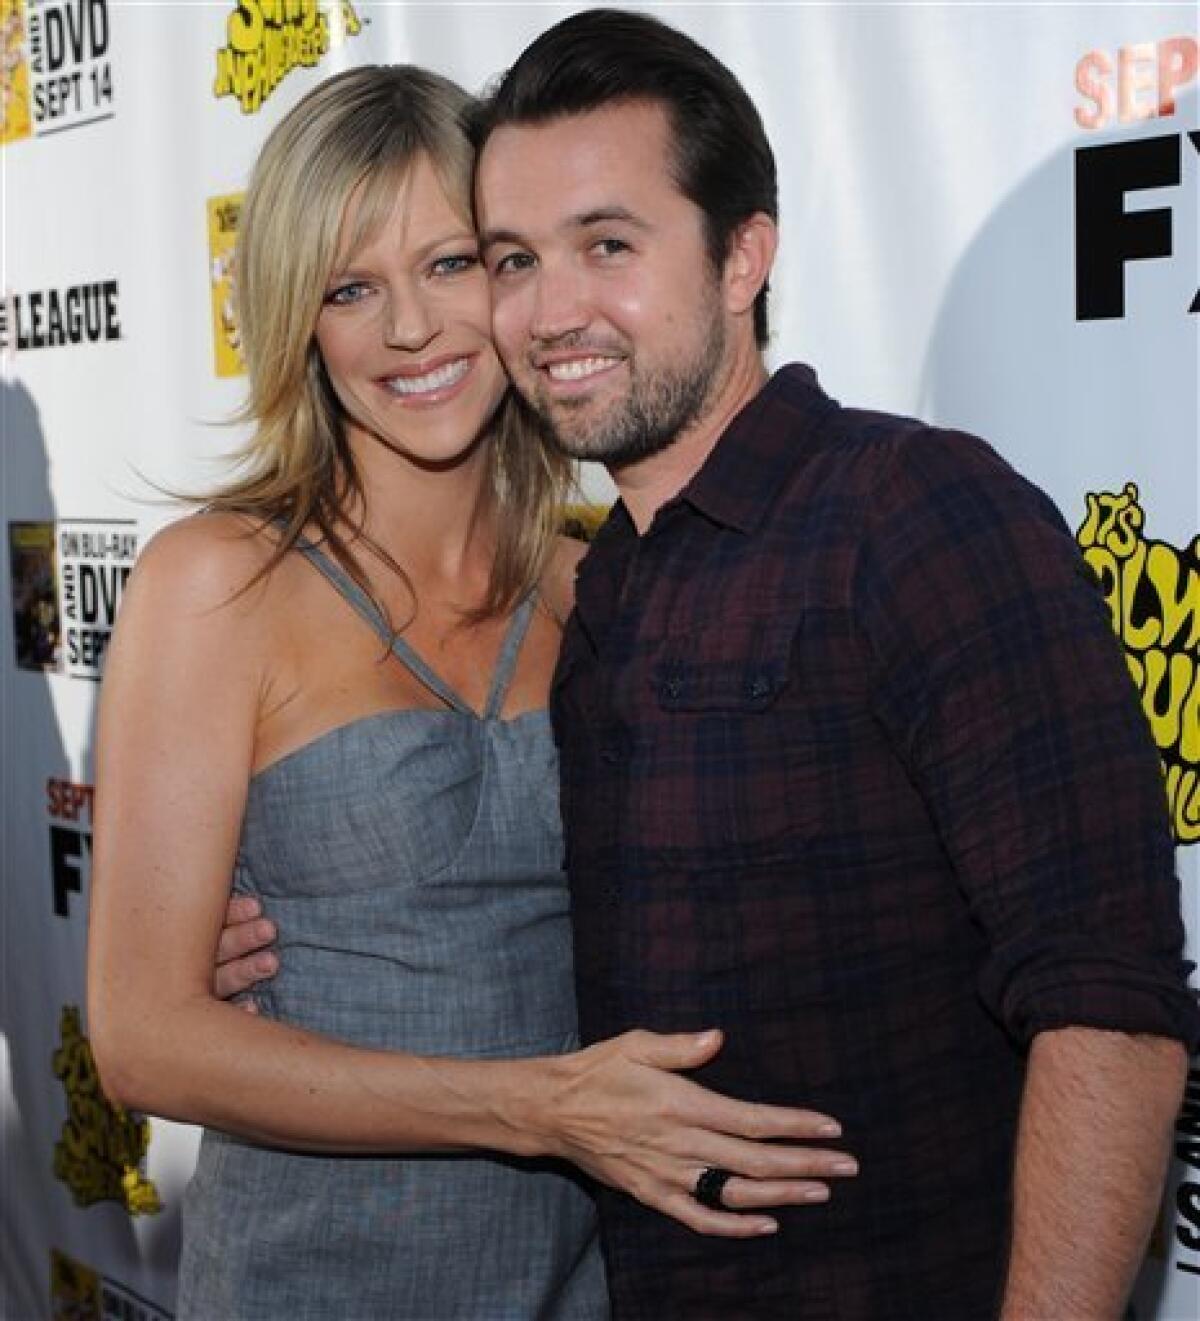 It's Always Sunny Birth Alert: Charlie Day Is a Dad!